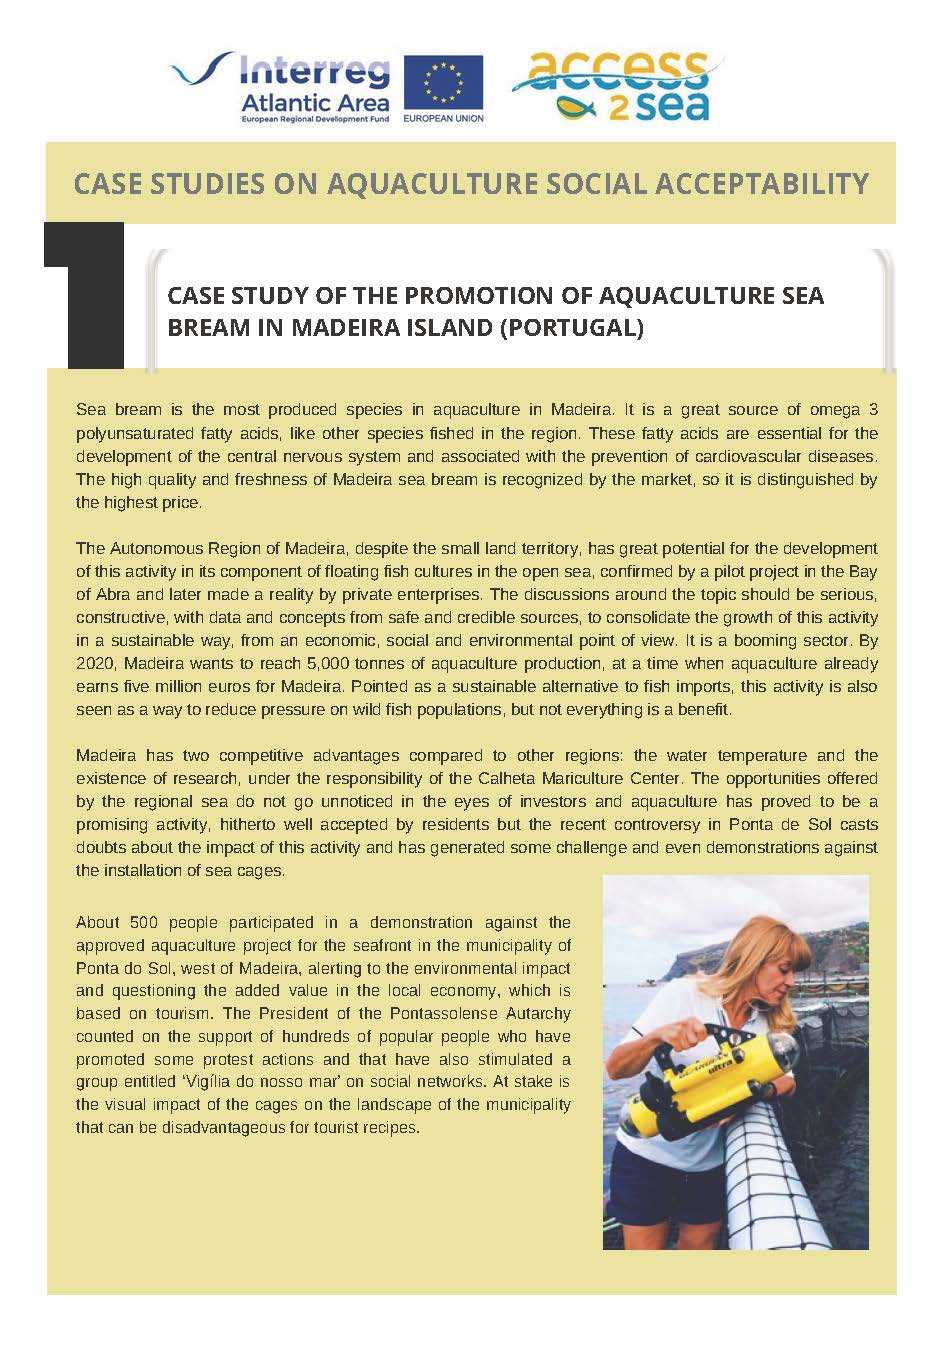 Case Study of Promotion of Aquaculture Sea Bream in Madeira Island (Portugal)